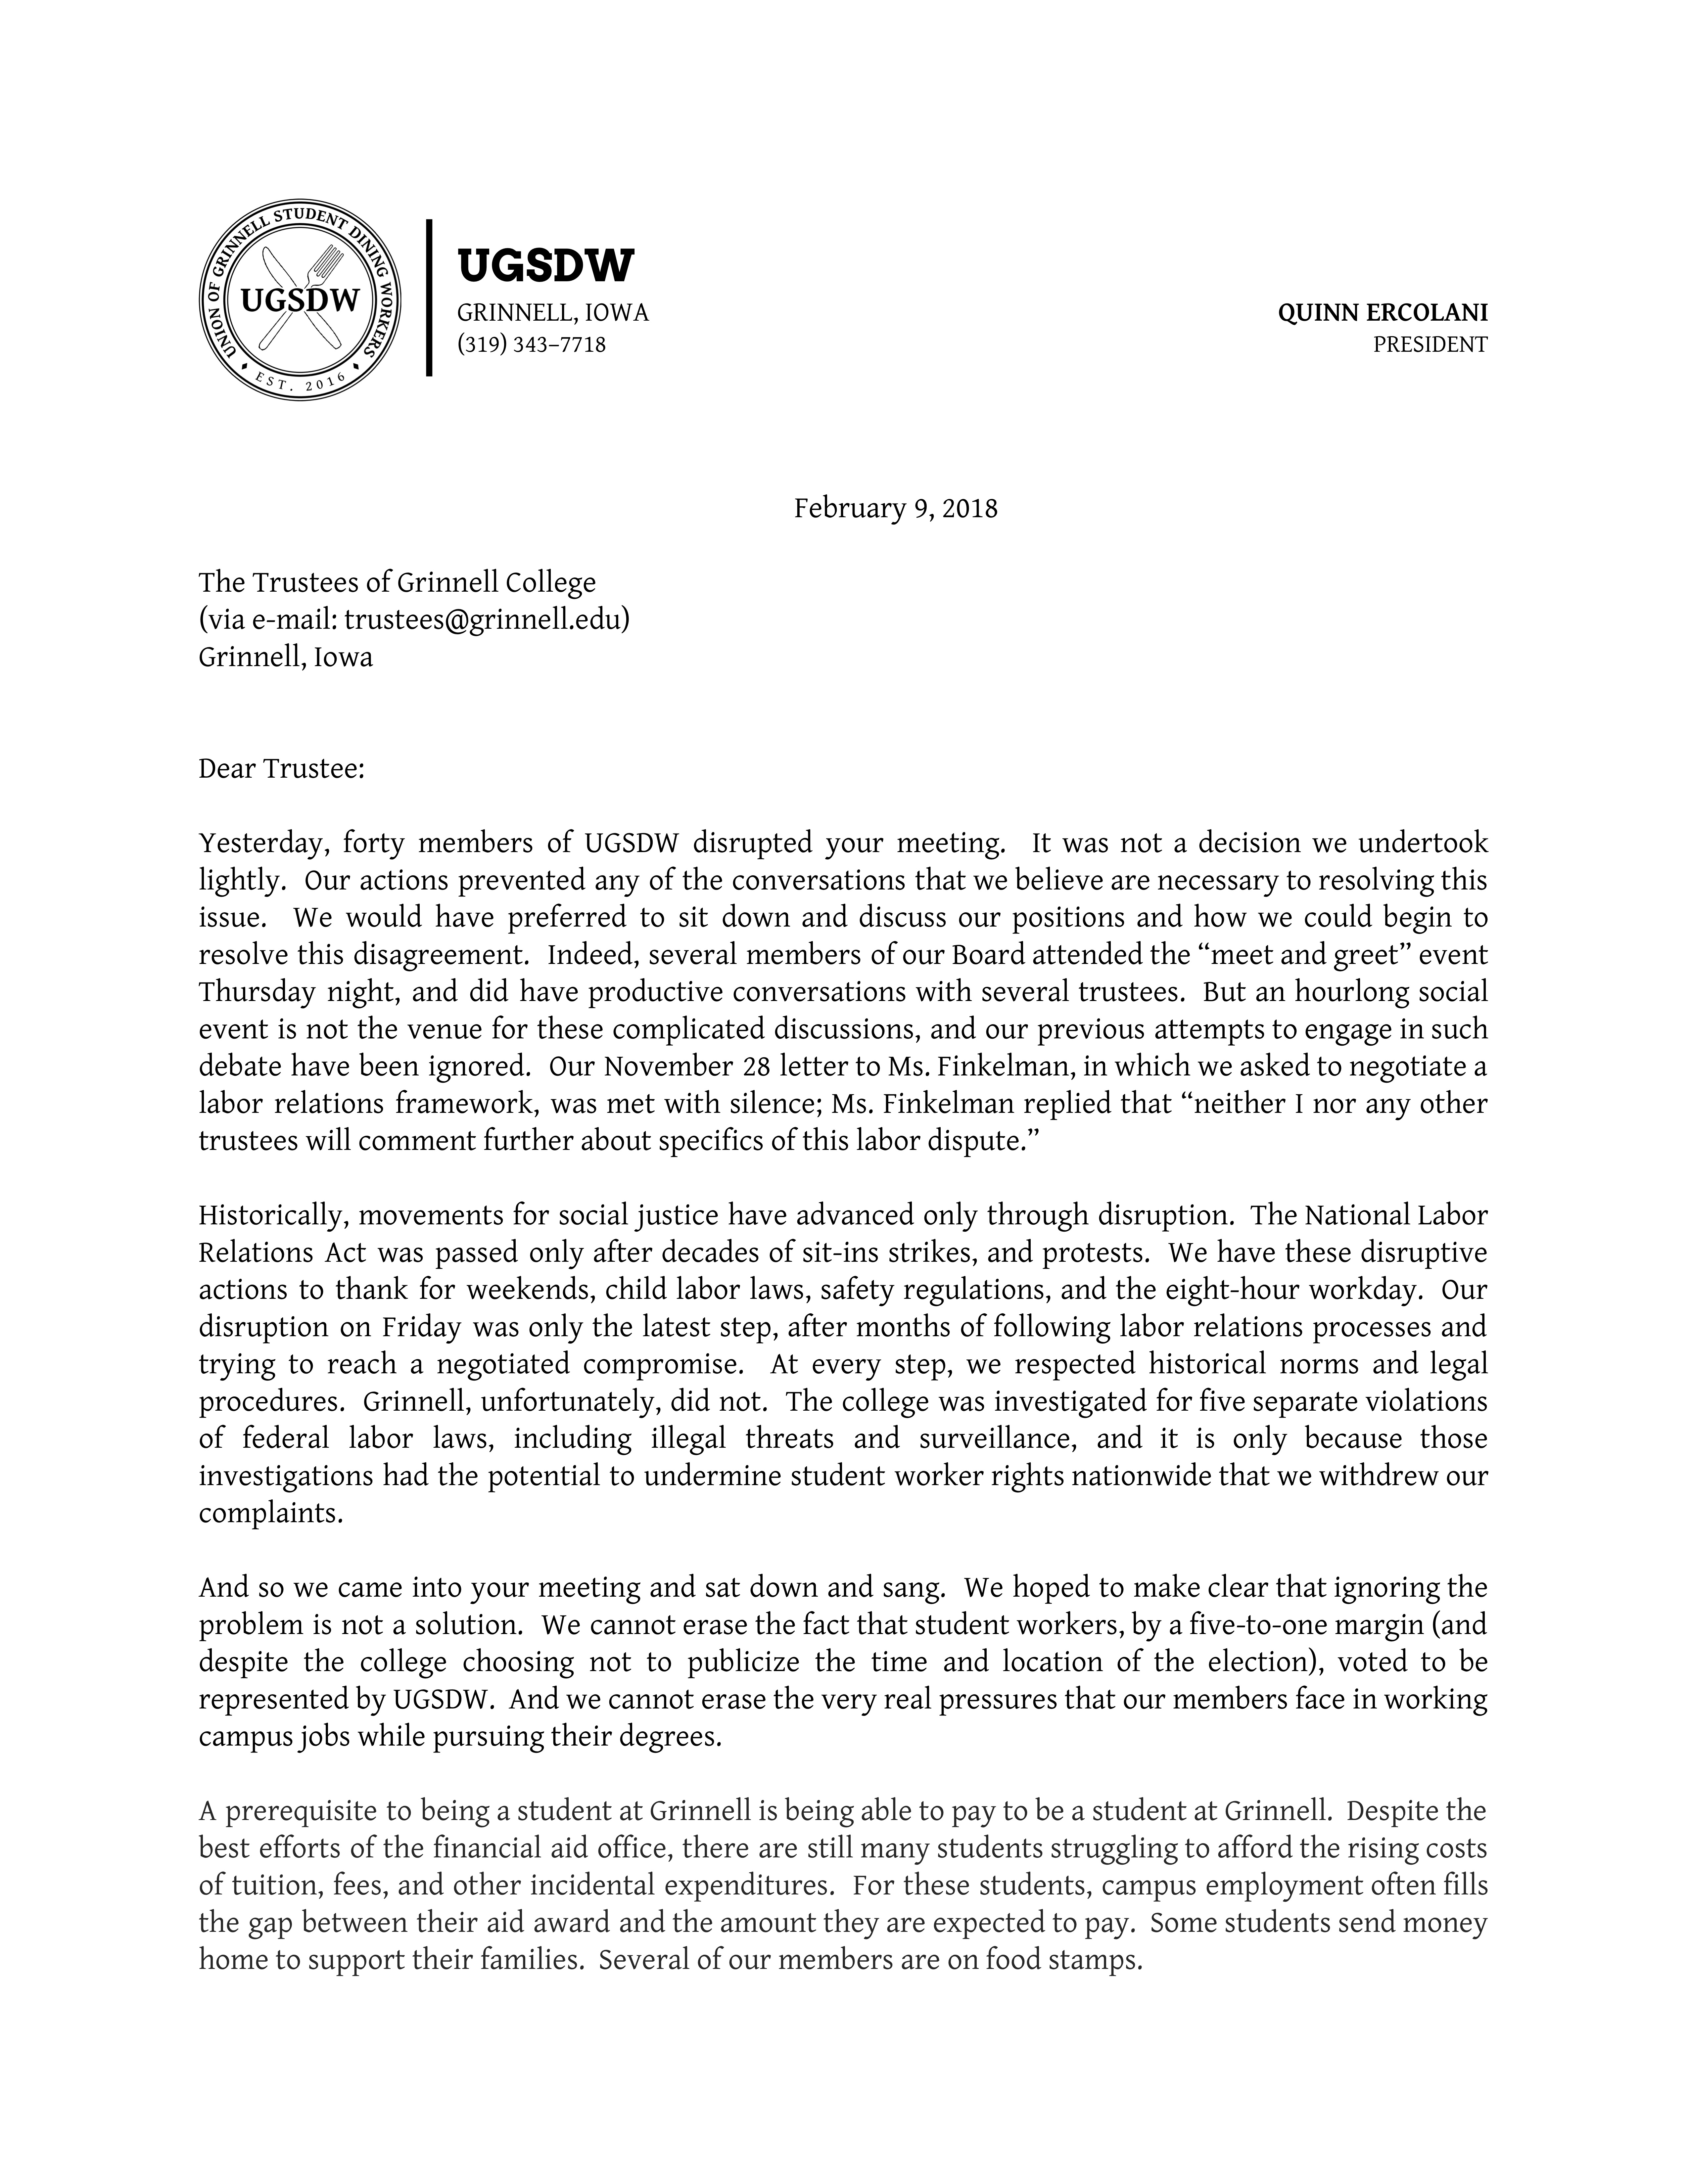 Letter sent to Grinnell's Board of Trustees